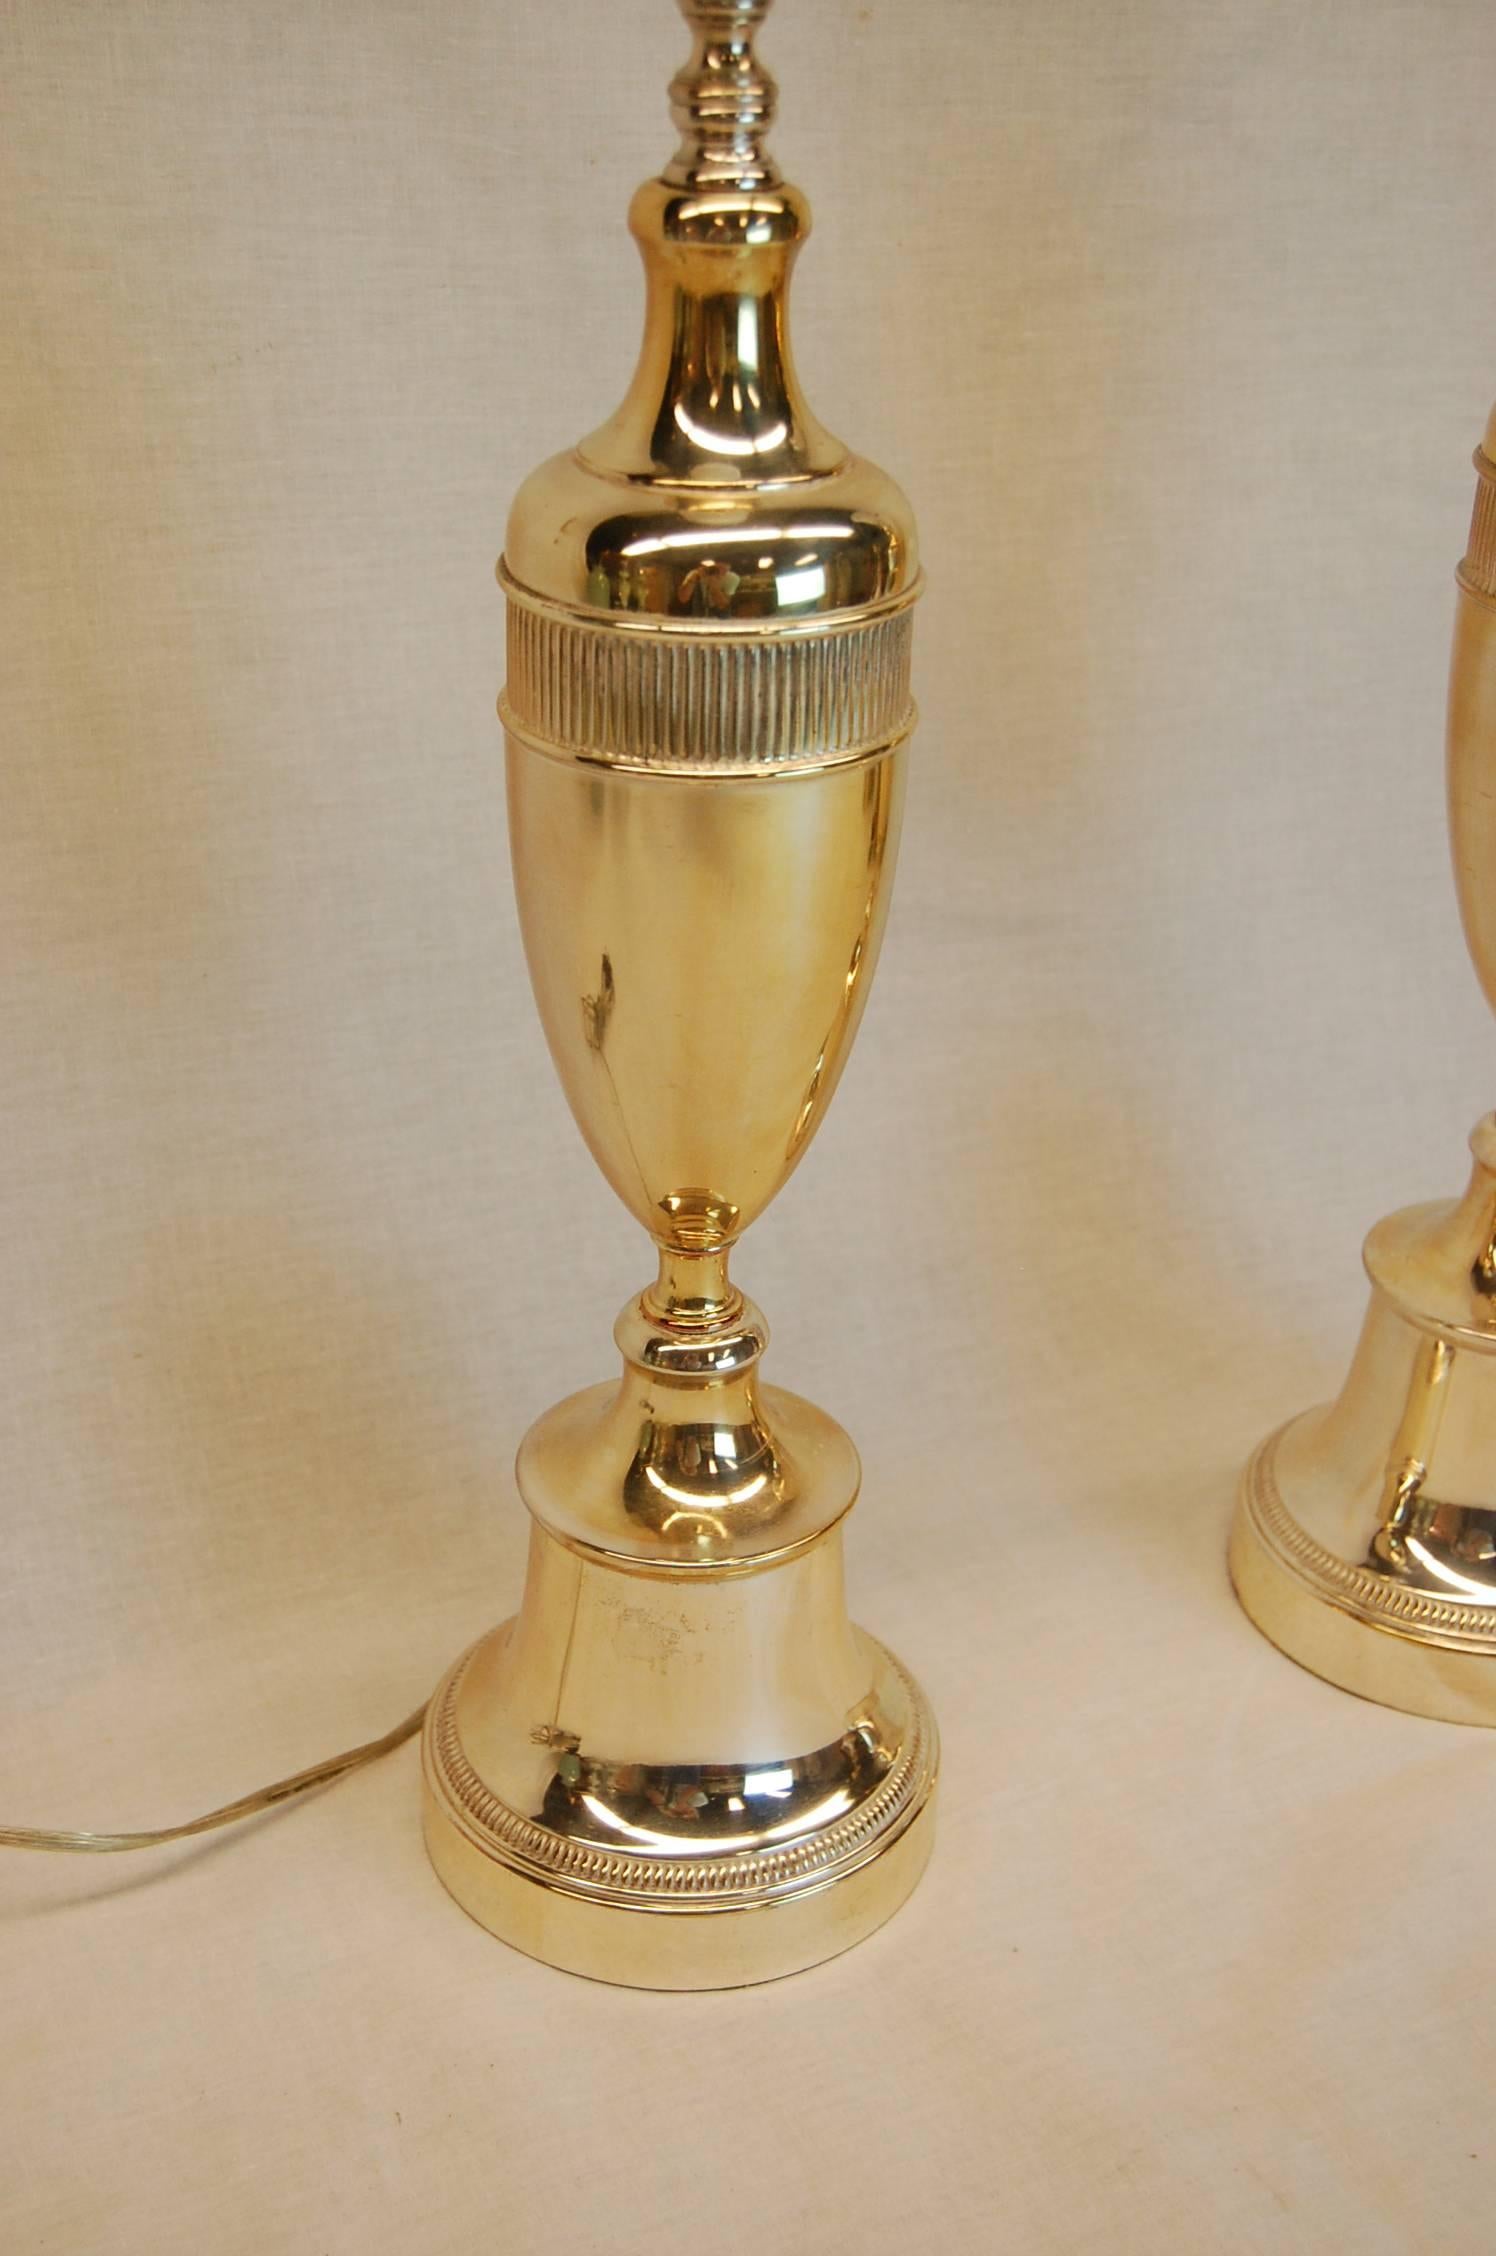 American Pair of Art Deco Period Silver Plated Urn Lamps, circa 1940s For Sale